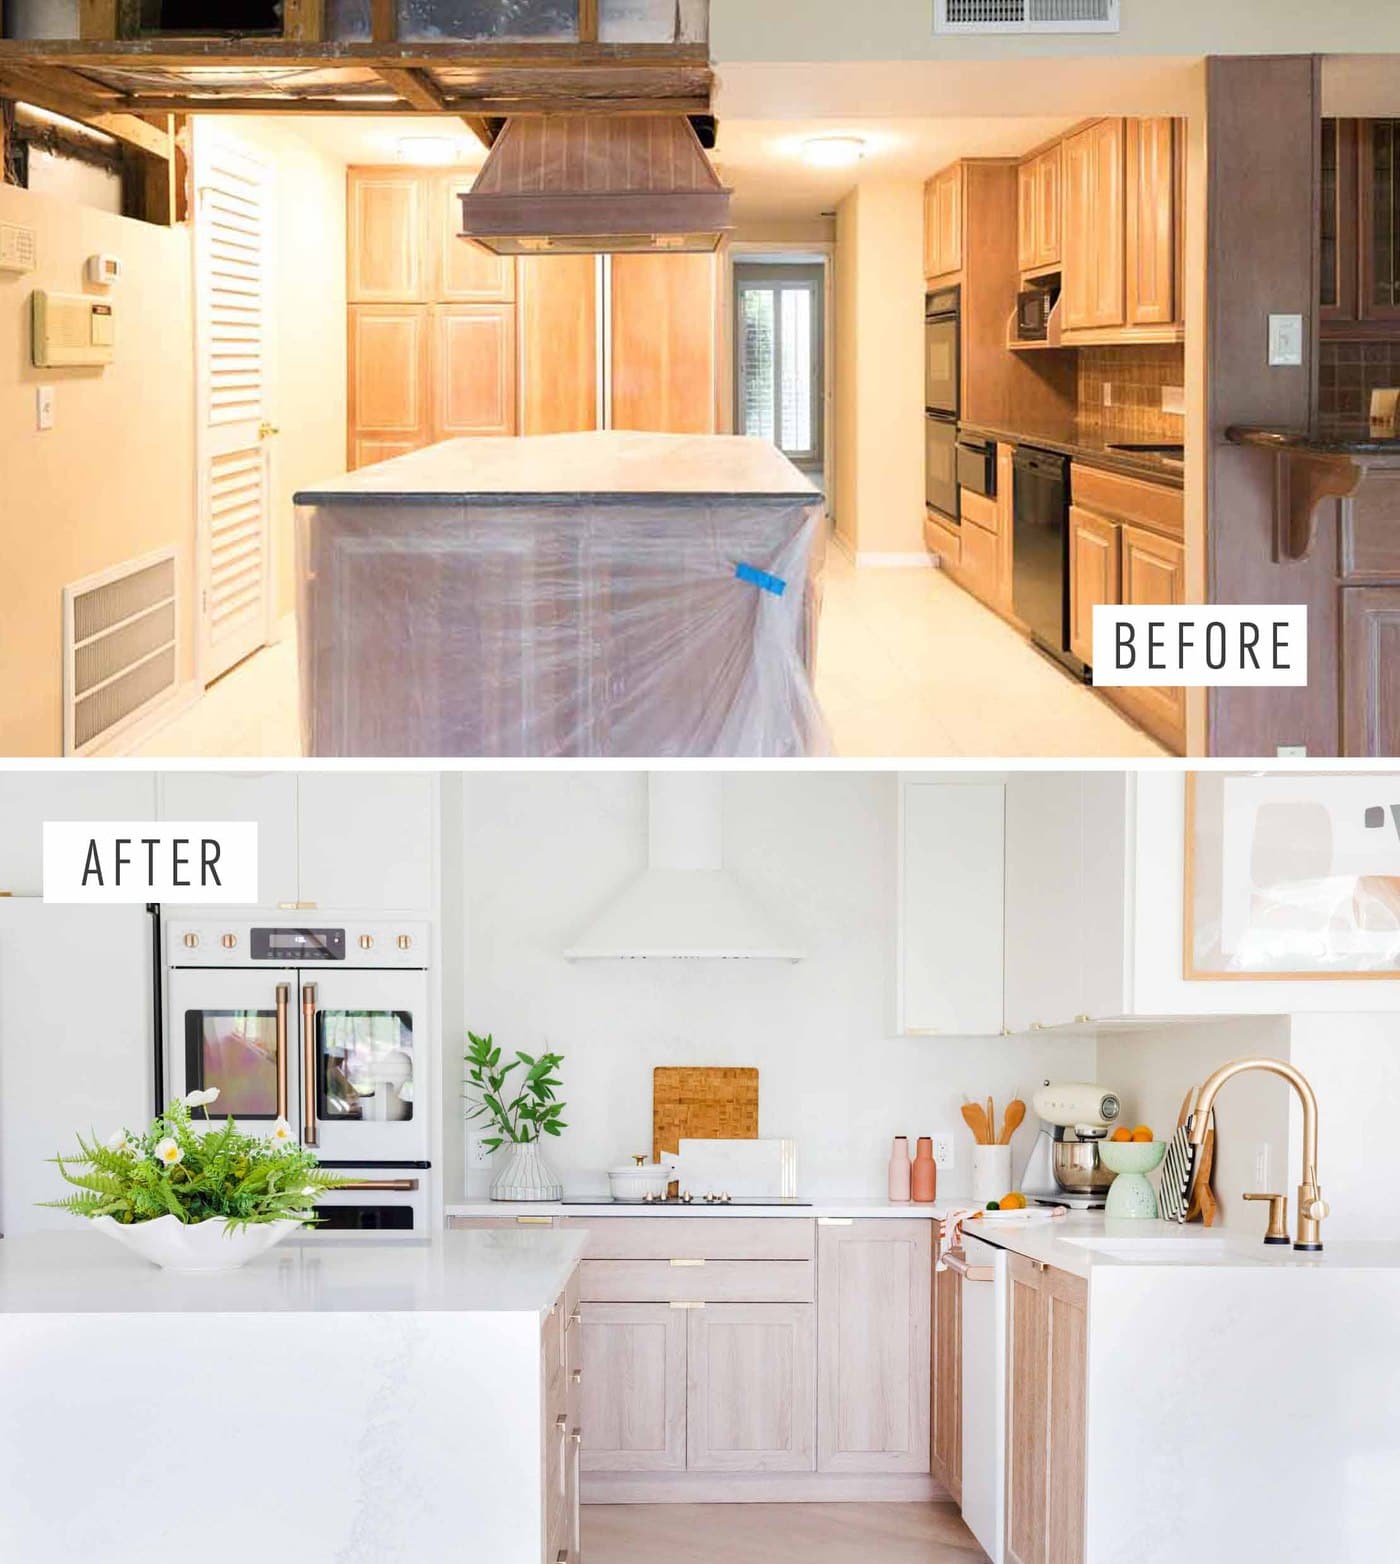 Our kitchen renovation was at the very top of my to-do list when we bought this fixer upper and I'm so excited to share the final kitchen before and after photos!! Sugar & Cloth Casa: Our Renovation Kitchen Before & After by top Houston lifestyle blogger Ashley Rose of Sugar and Cloth #kitchen #decor #design #makeover 